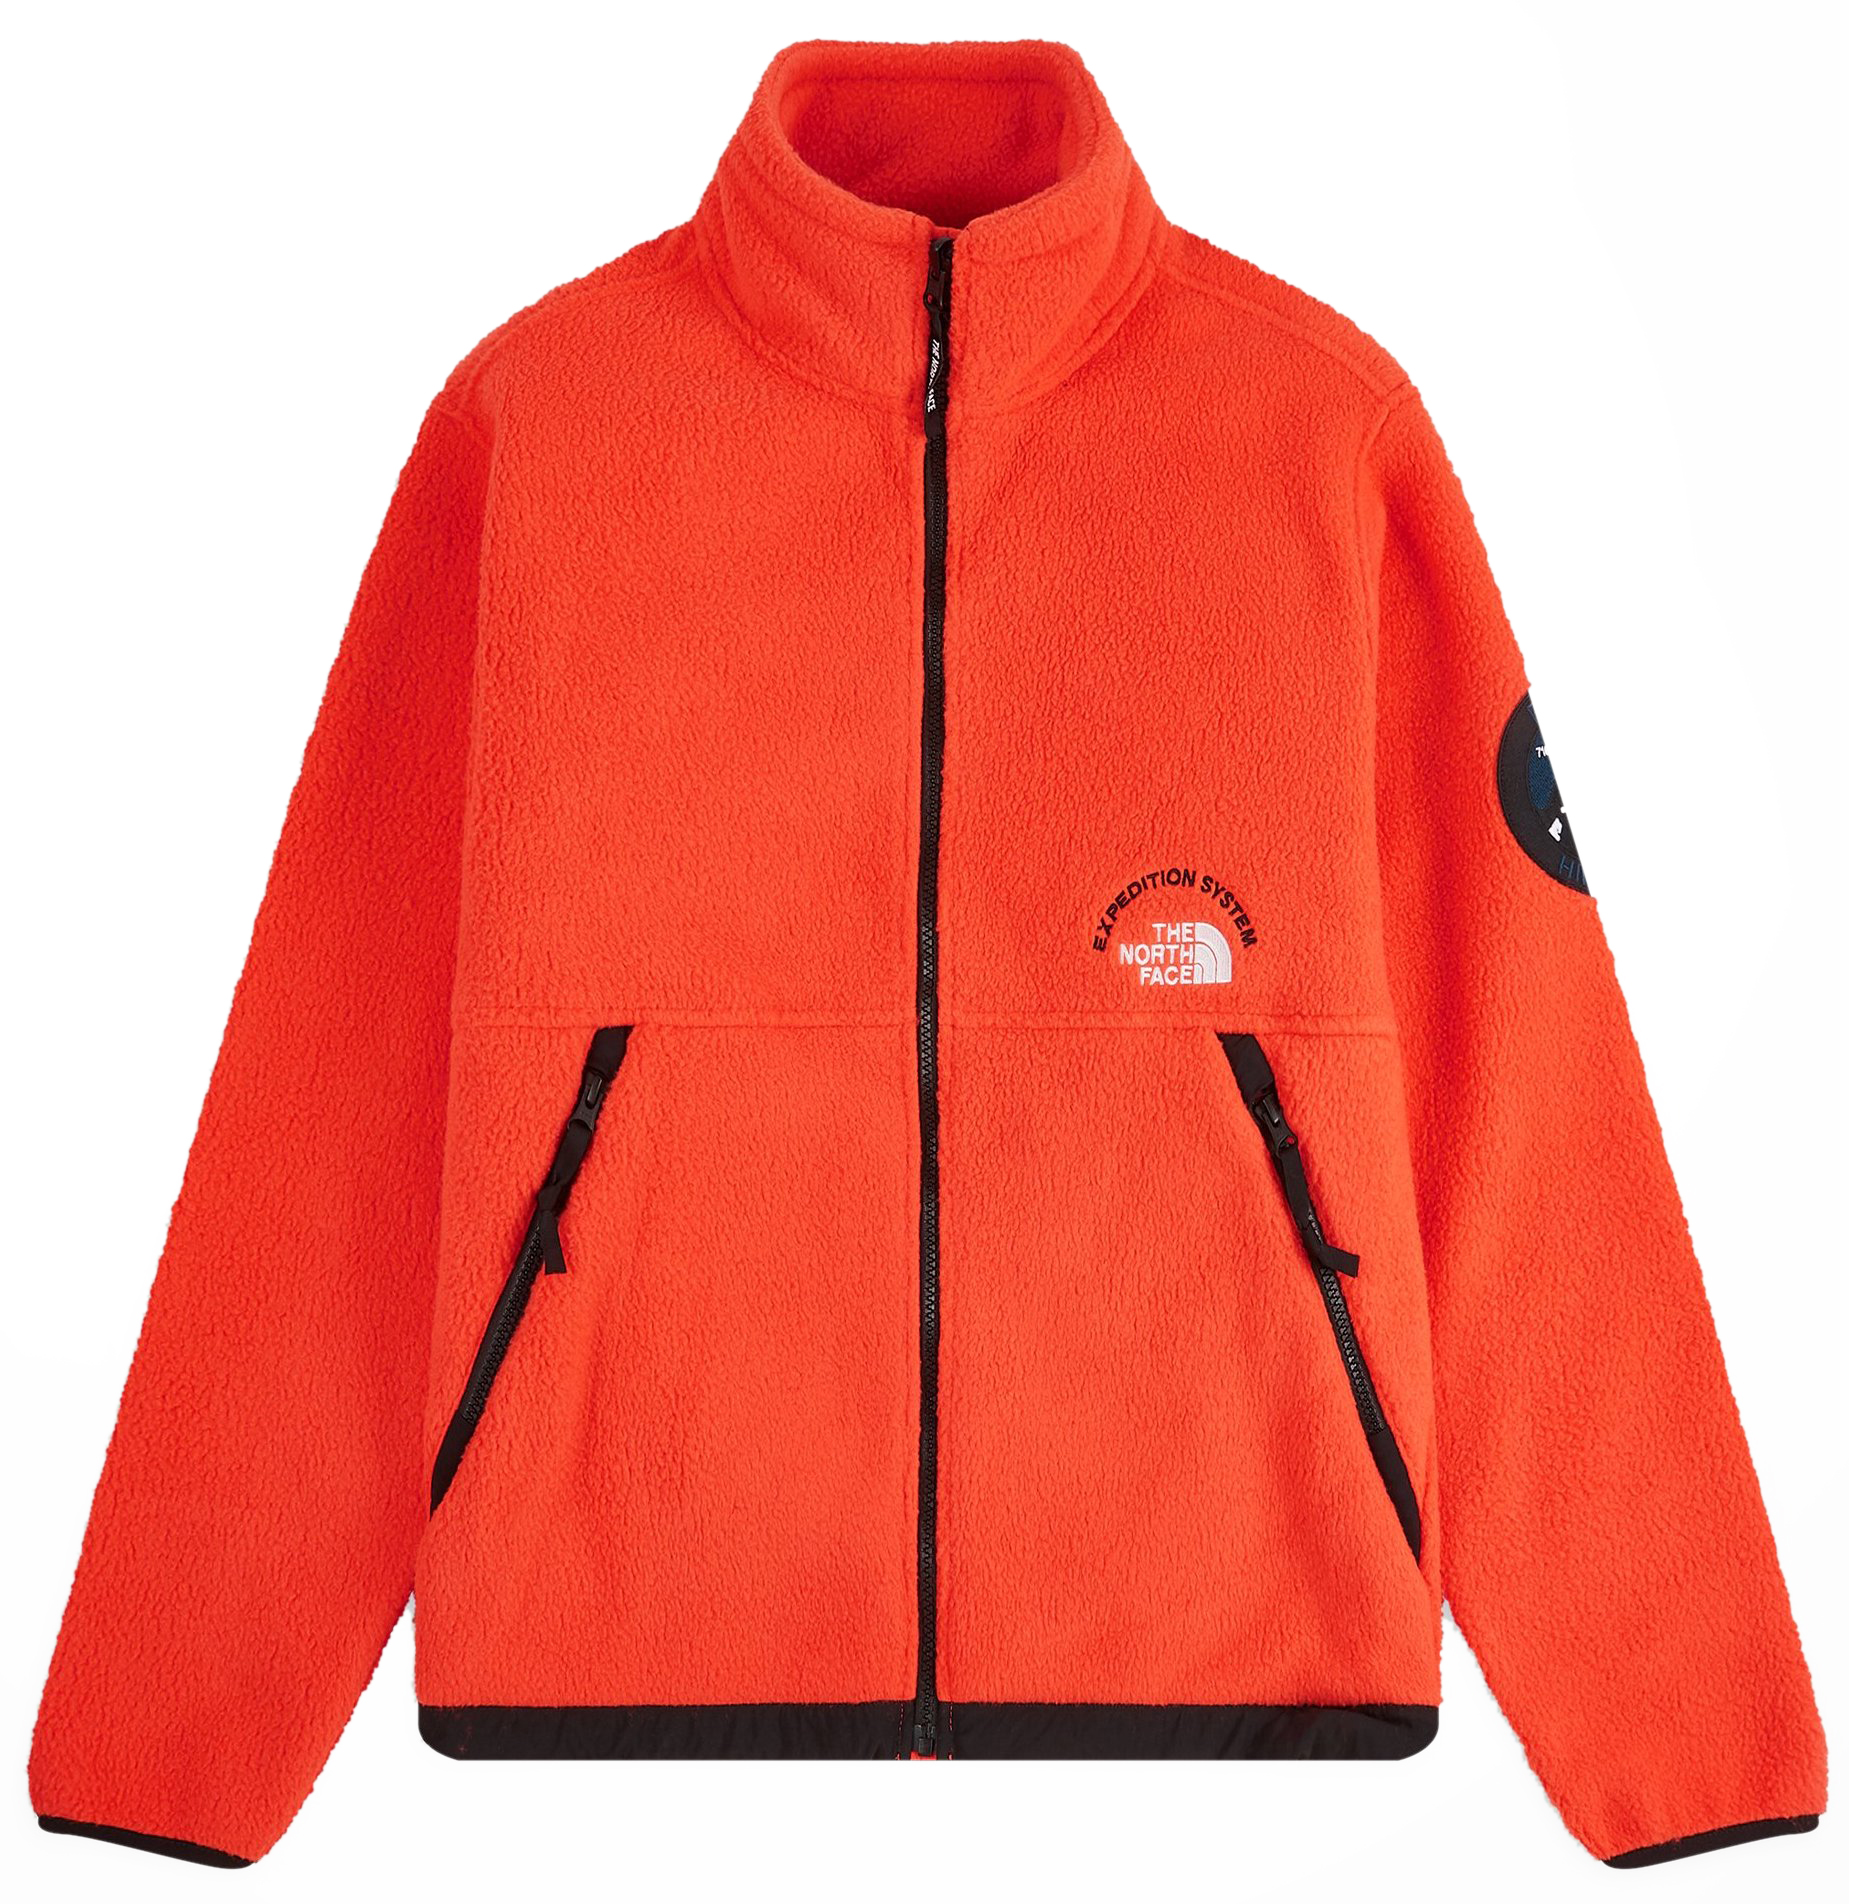 The North Face Pumori Expedition Jacket